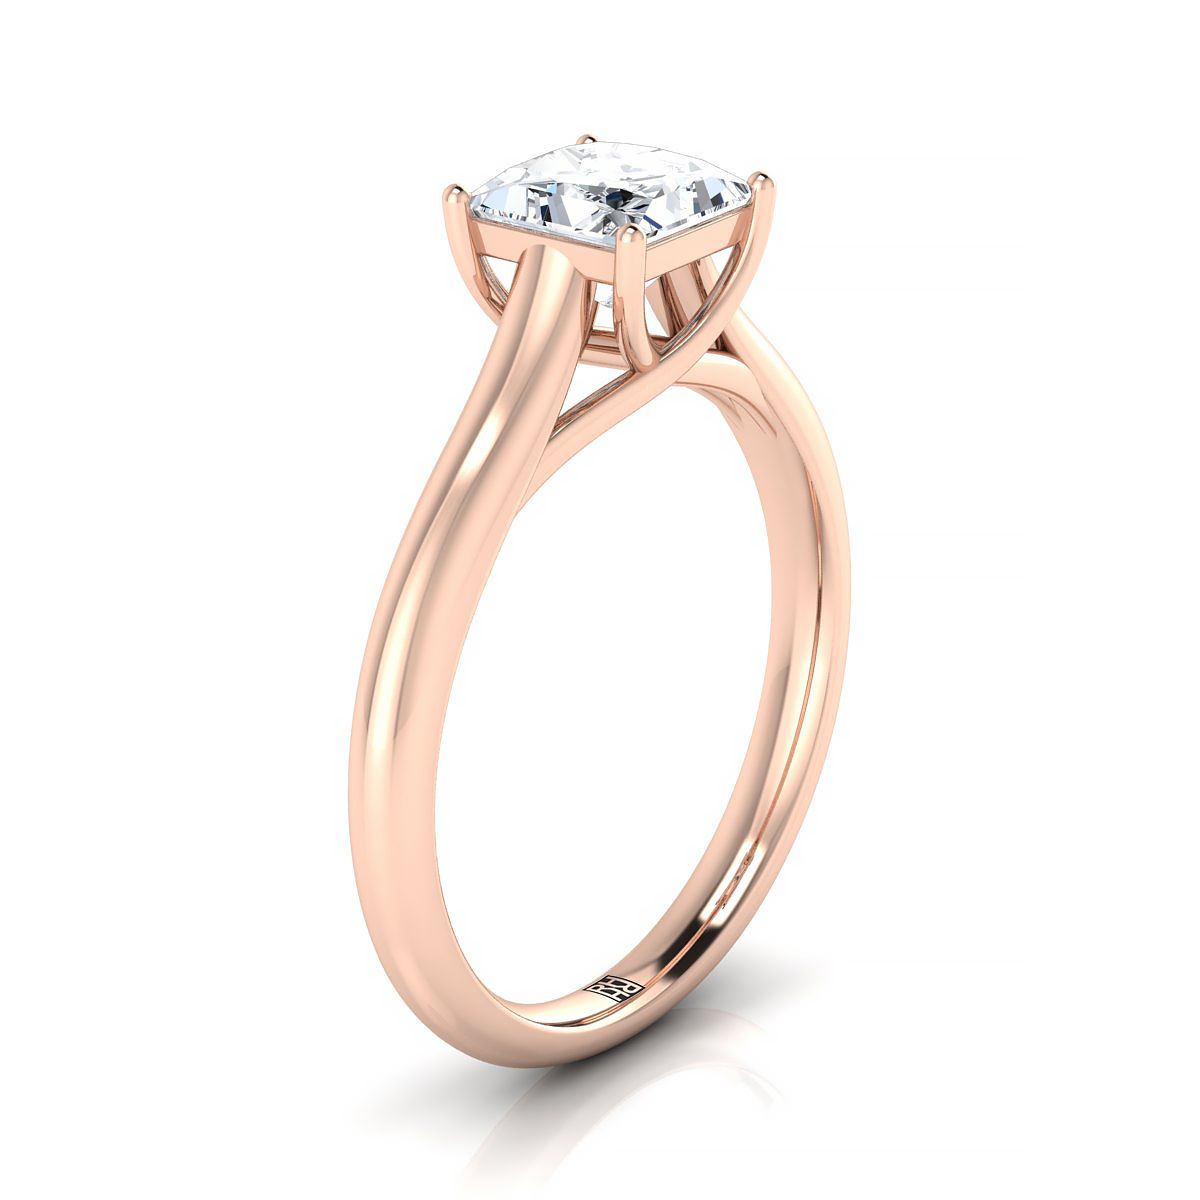 14K Rose Gold Princess Cut Rounded Classic Comfort Fit Solitaire Ring